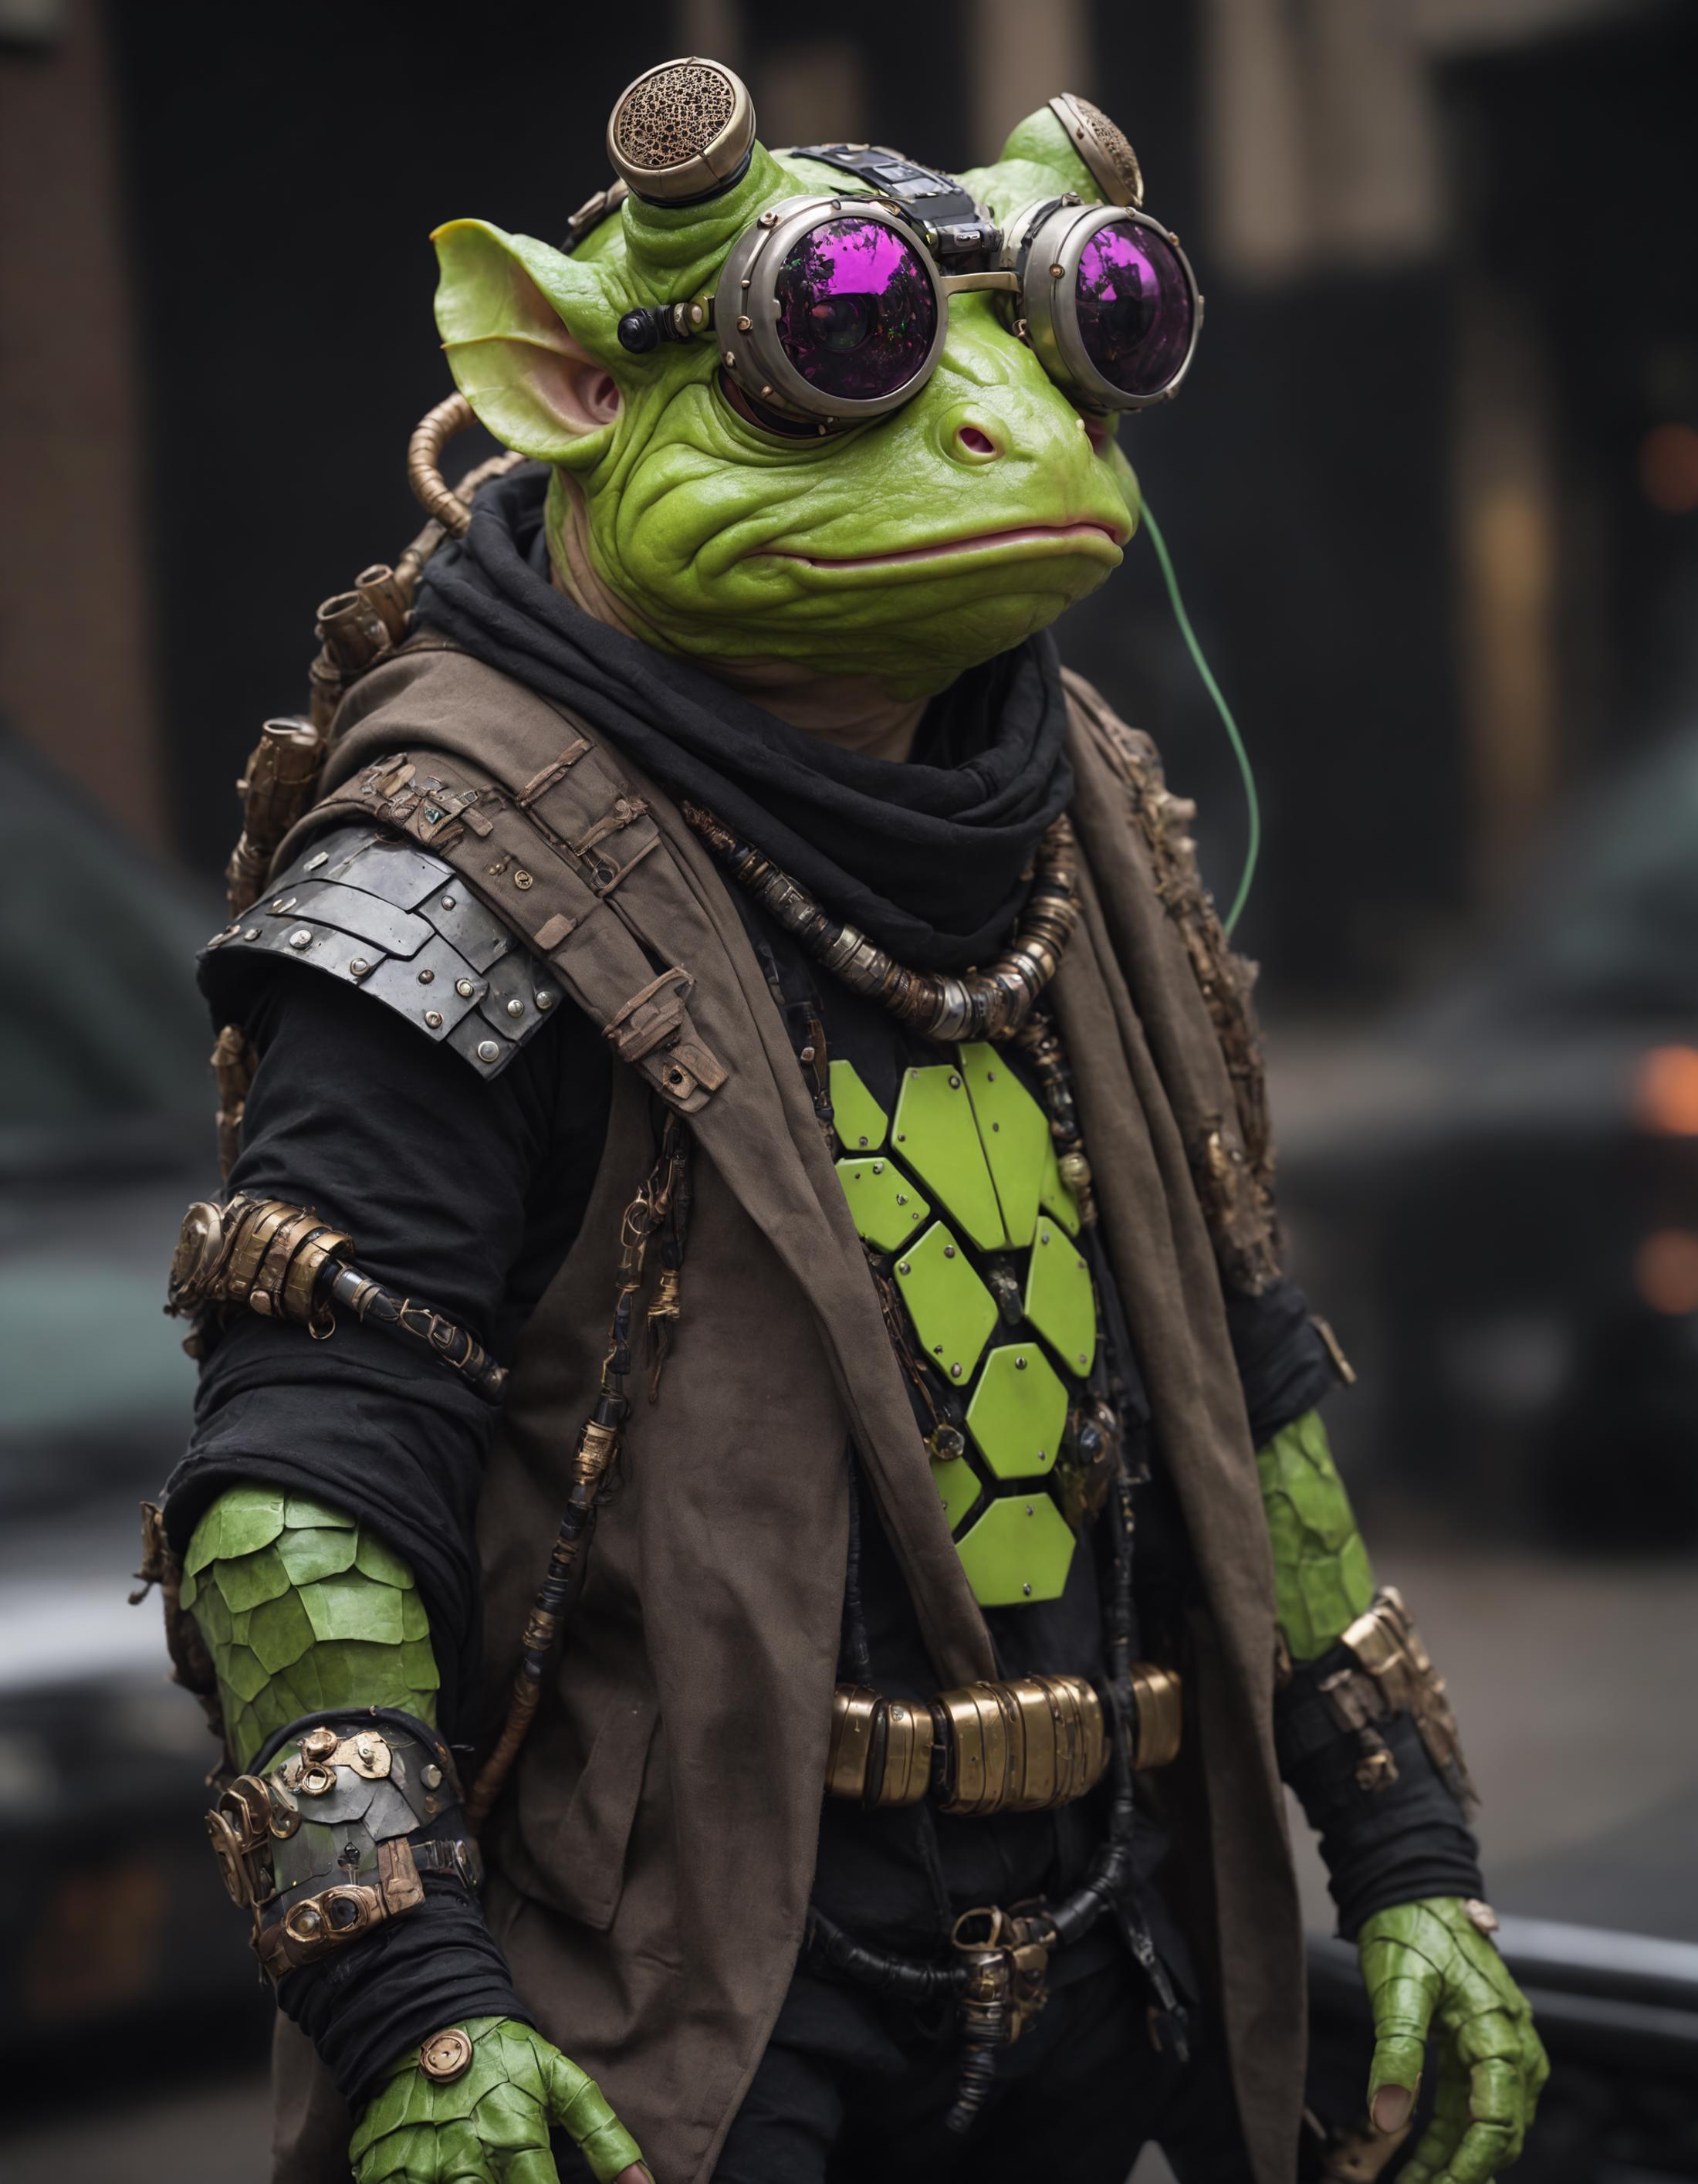 A man dressed in a frog costume wearing glasses and a chain around his neck.